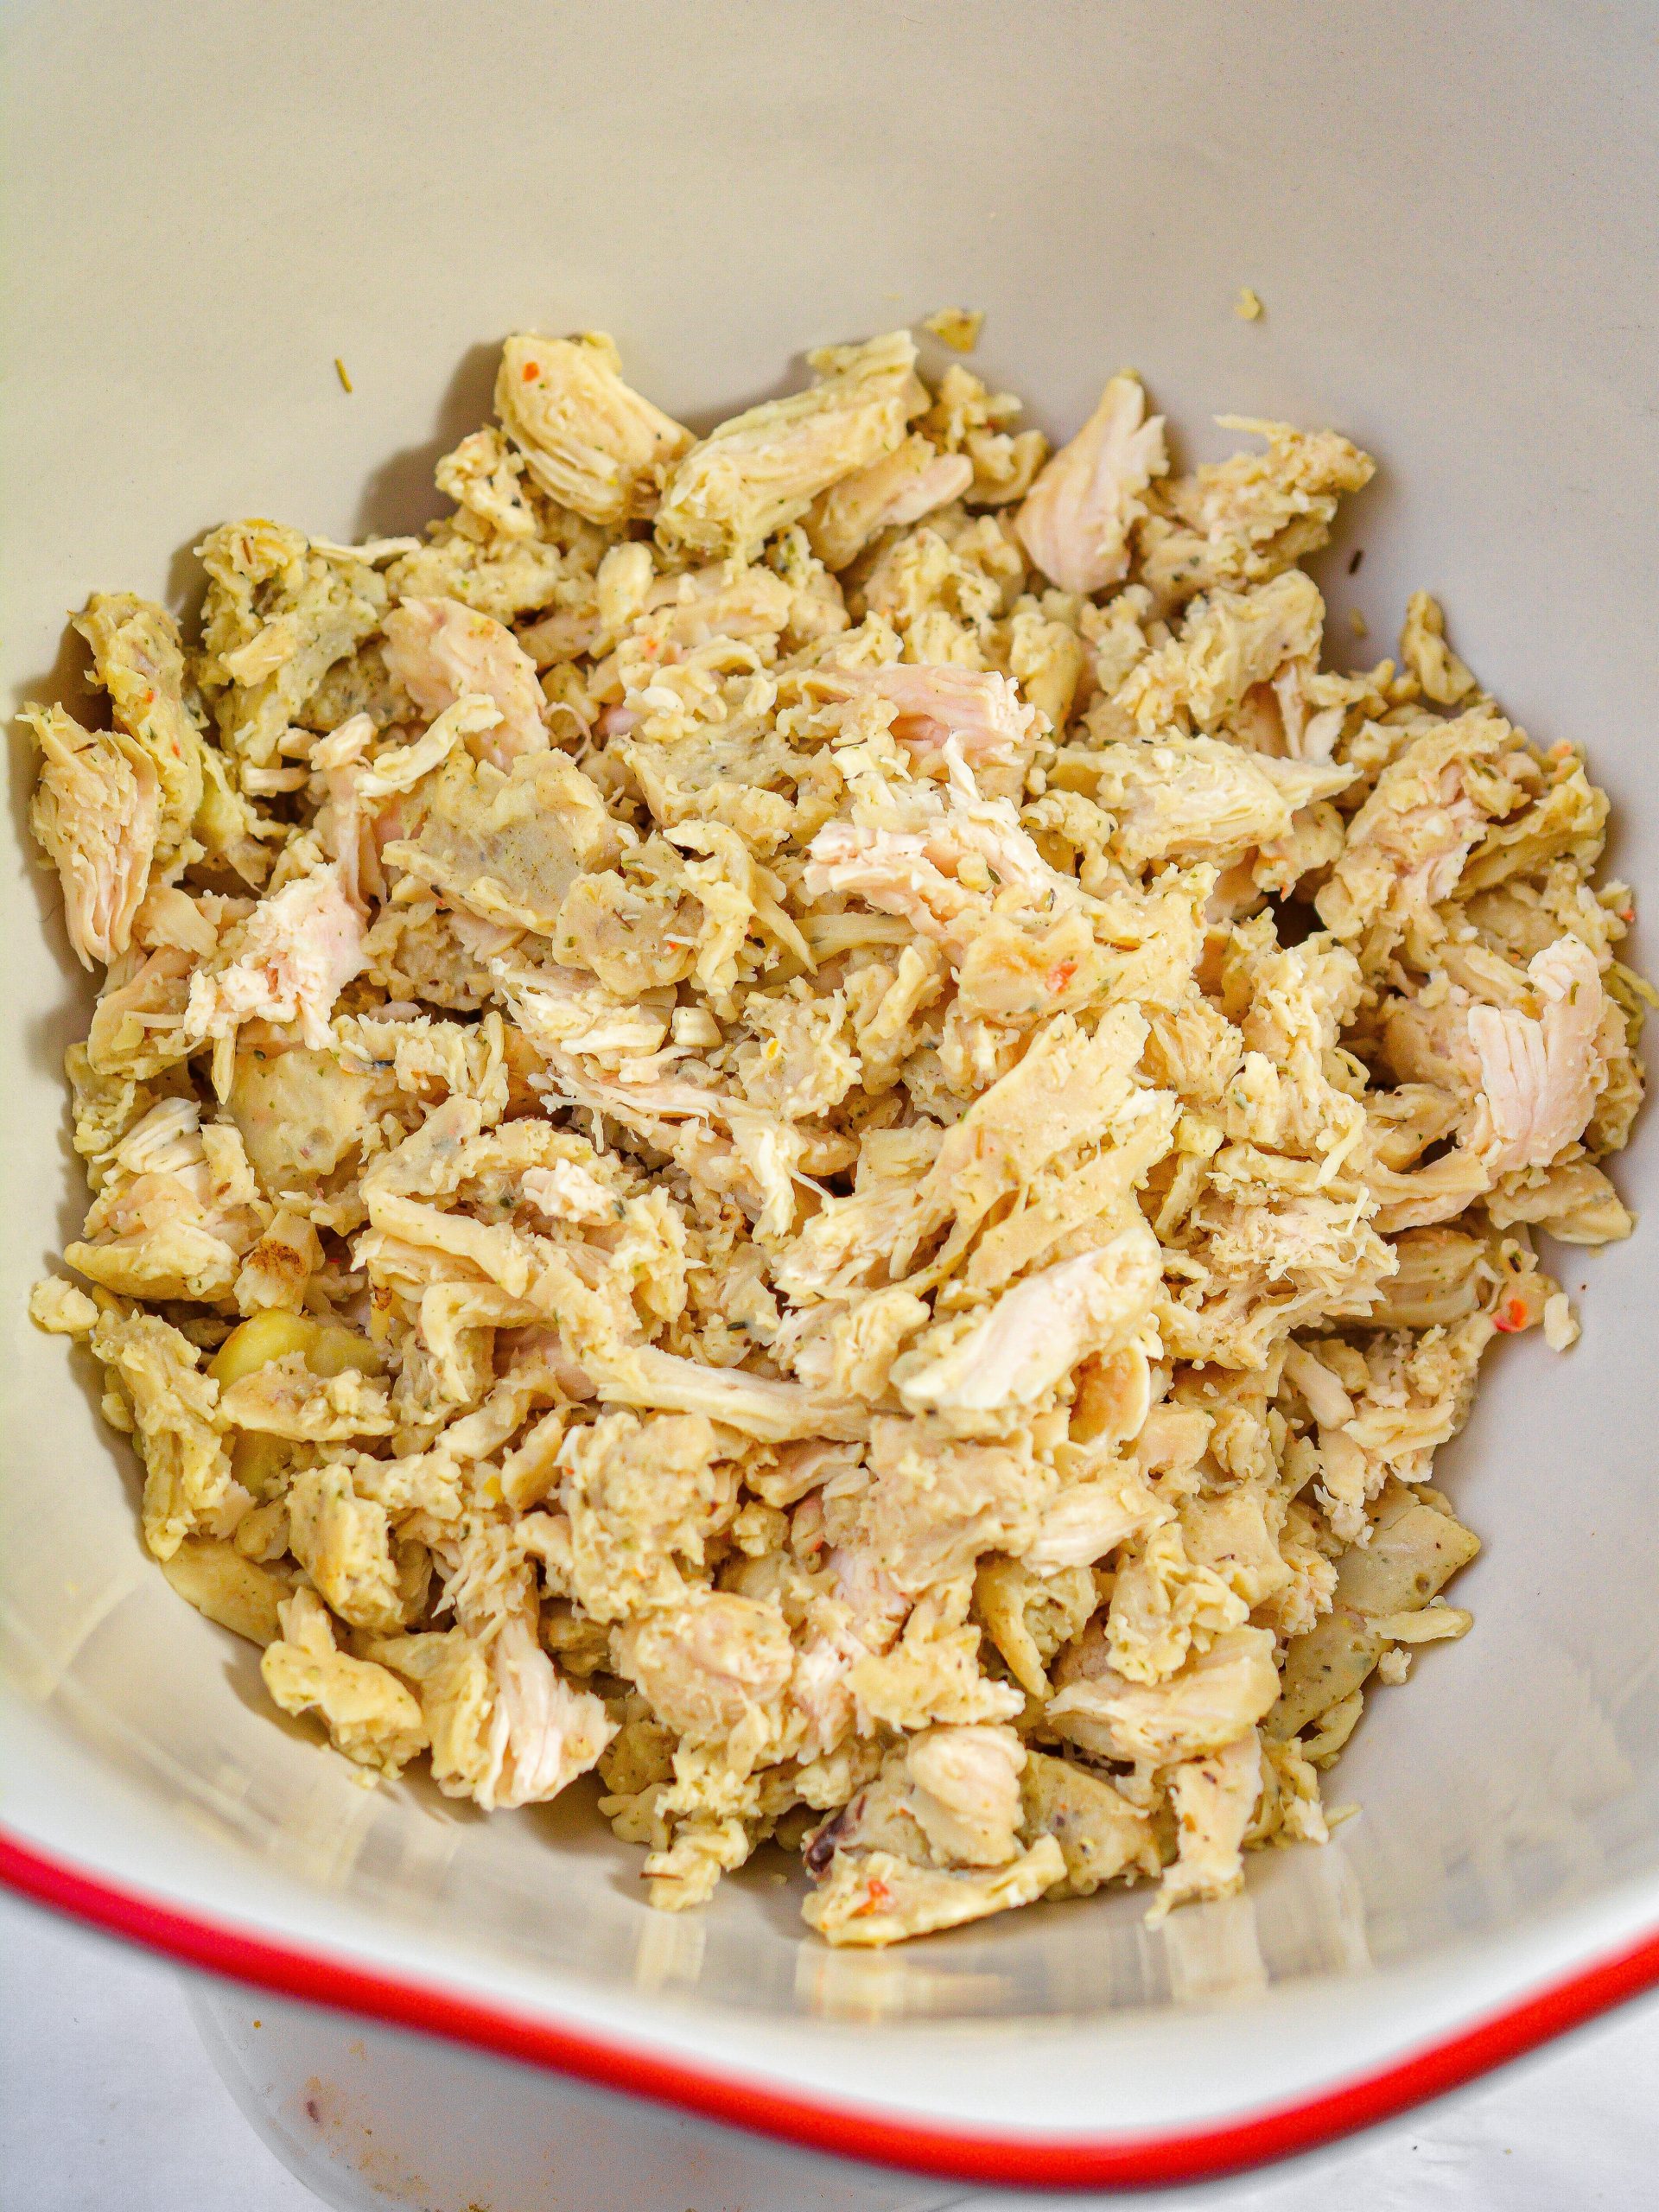 In a bowl, start by adding the shredded chicken and onion